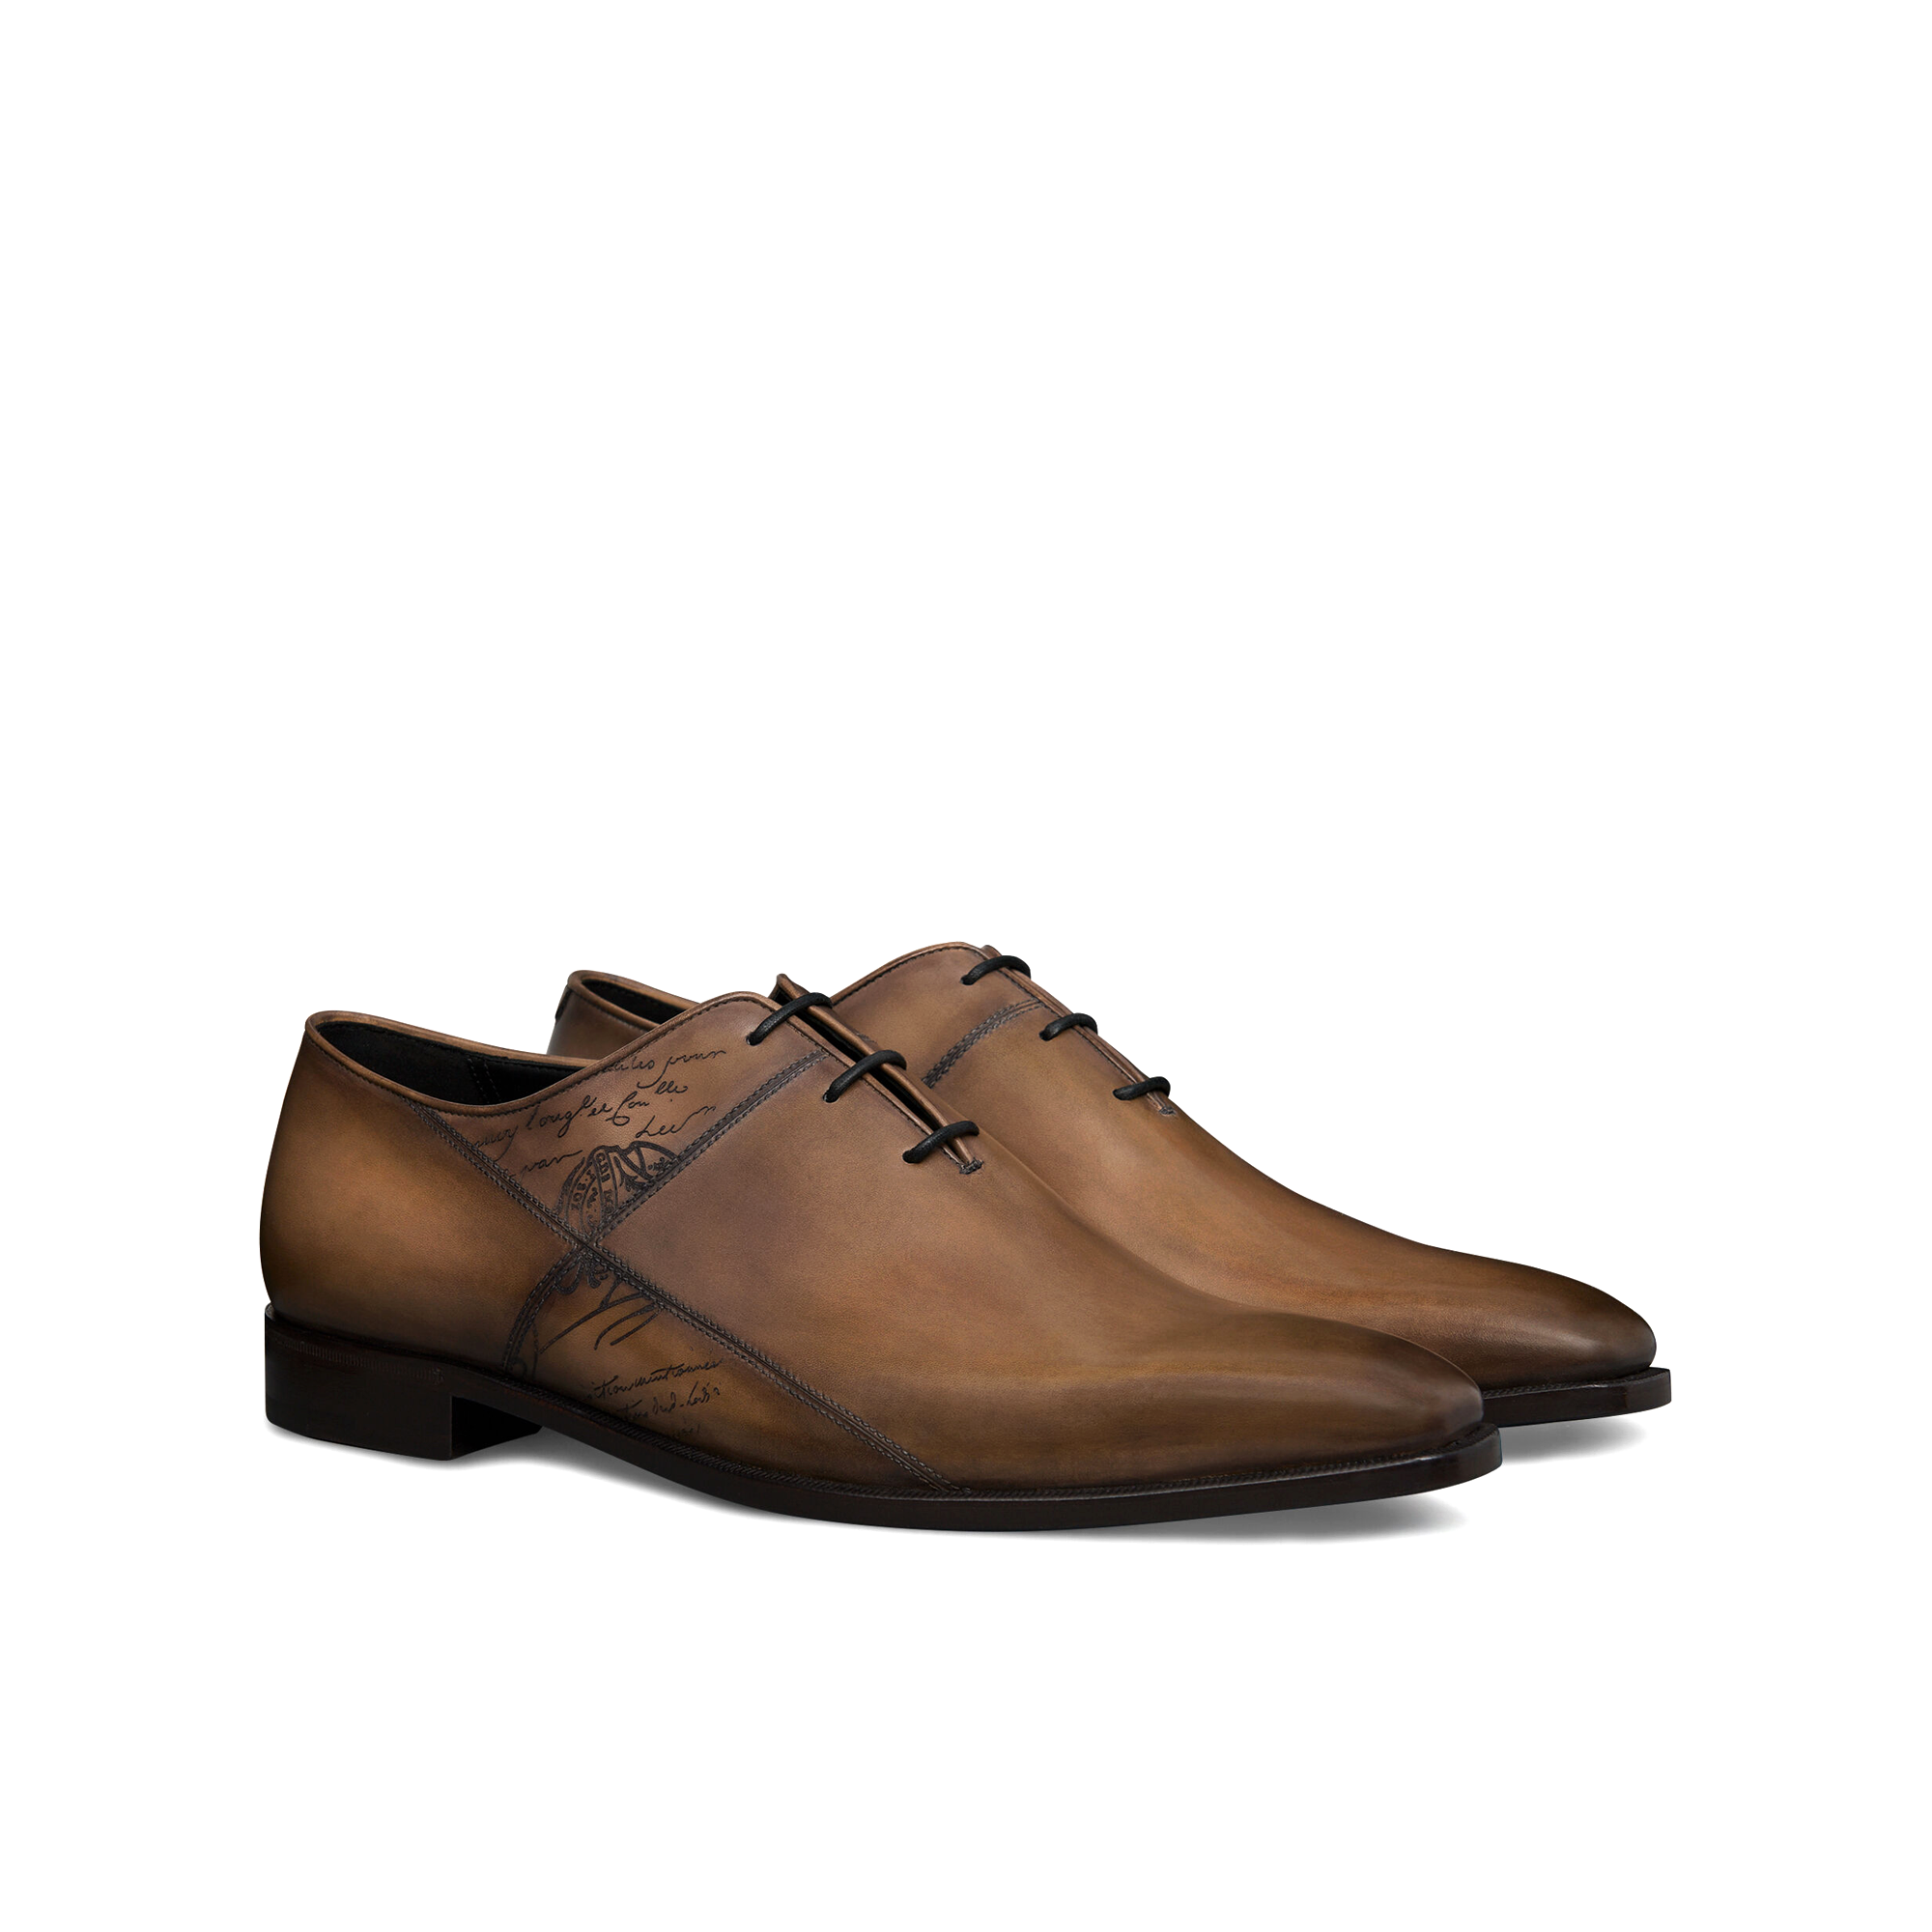 Lucien Smith Oxford Shoes